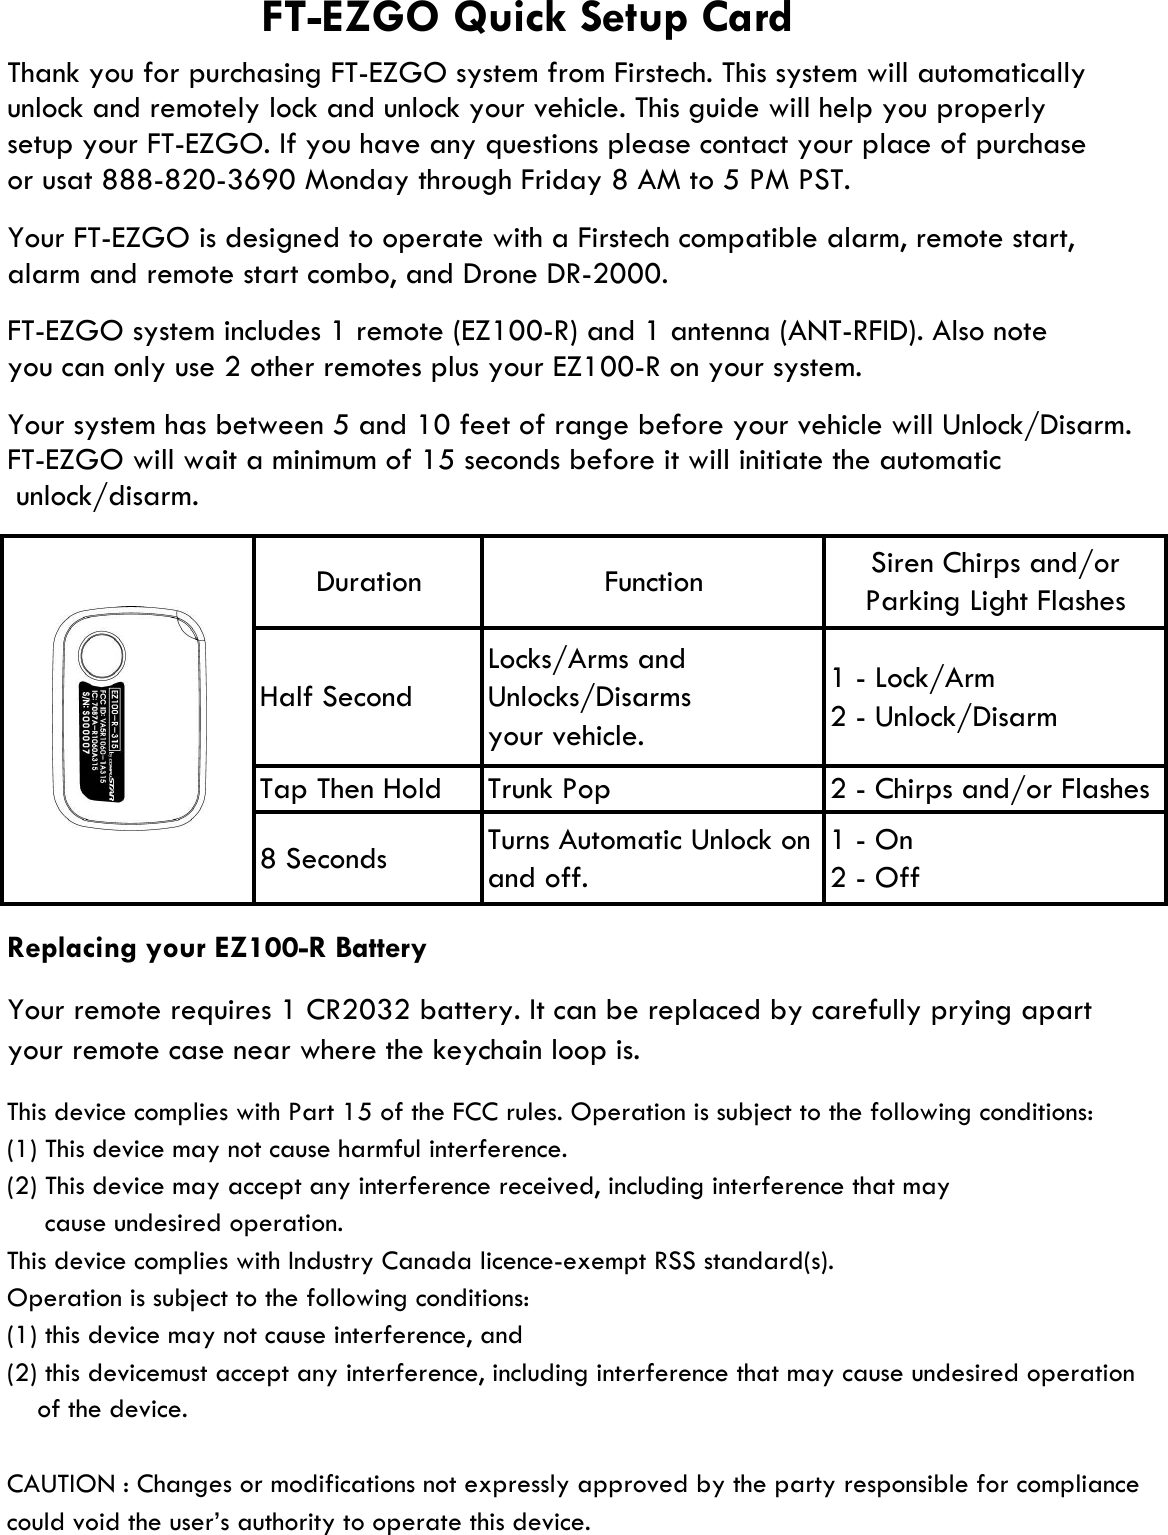 alarm and remote start combo, and Drone DR-2000.Replacing your EZ100-R BatteryThis device complies with Part 15 of the FCC rules. Operation is subject to the following conditions:(1) This device may not cause harmful interference.(2) This device may accept any interference received, including interference that may     cause undesired operation.This device complies with Industry Canada licence-exempt RSS standard(s).Operation is subject to the following conditions:(1) this device may not cause interference, and (2) this devicemust accept any interference, including interference that may cause undesired operationCAUTION : Changes or modifications not expressly approved by the party responsible for compliancecould void the user’s authority to operate this device.Locks/Arms andUnlocks/Disarmsyour vehicle.Half Second1 - On2 - OffTurns Automatic Unlock onand off.8 SecondsTrunk PopTap Then Holdyour remote case near where the keychain loop is.FT-EZGO system includes 1 remote (EZ100-R) and 1 antenna (ANT-RFID). Also noteYour system has between 5 and 10 feet of range before your vehicle will Unlock/Disarm.  unlock/disarm.FT-EZGO will wait a minimum of 15 seconds before it will initiate the automaticyou can only use 2 other remotes plus your EZ100-R on your system.Siren Chirps and/orParking Light FlashesFunction1 - Lock/Arm2 - Unlock/DisarmFT-EZGO Quick Setup CardYour FT-EZGO is designed to operate with a Firstech compatible alarm, remote start,Thank you for purchasing FT-EZGO system from Firstech. This system will automaticallyor usat 888-820-3690 Monday through Friday 8 AM to 5 PM PST.setup your FT-EZGO. If you have any questions please contact your place of purchase unlock and remotely lock and unlock your vehicle. This guide will help you properly     of the device.2 - Chirps and/or FlashesYour remote requires 1 CR2032 battery. It can be replaced by carefully prying apart Duration